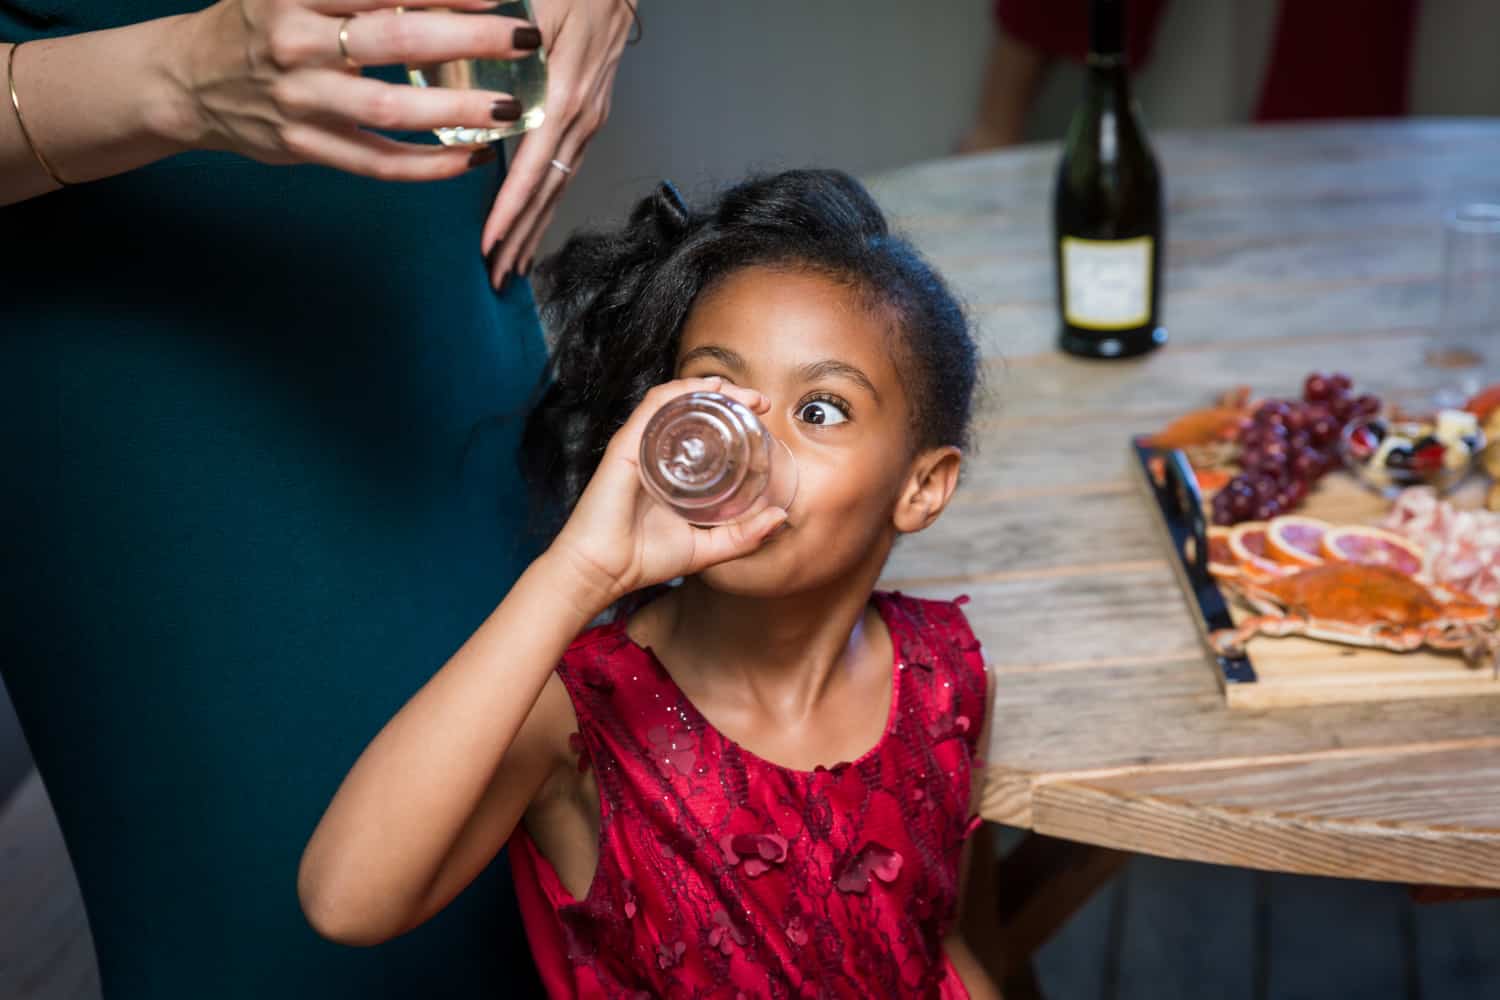 Little girl drinking from glass during a family reunion portrait